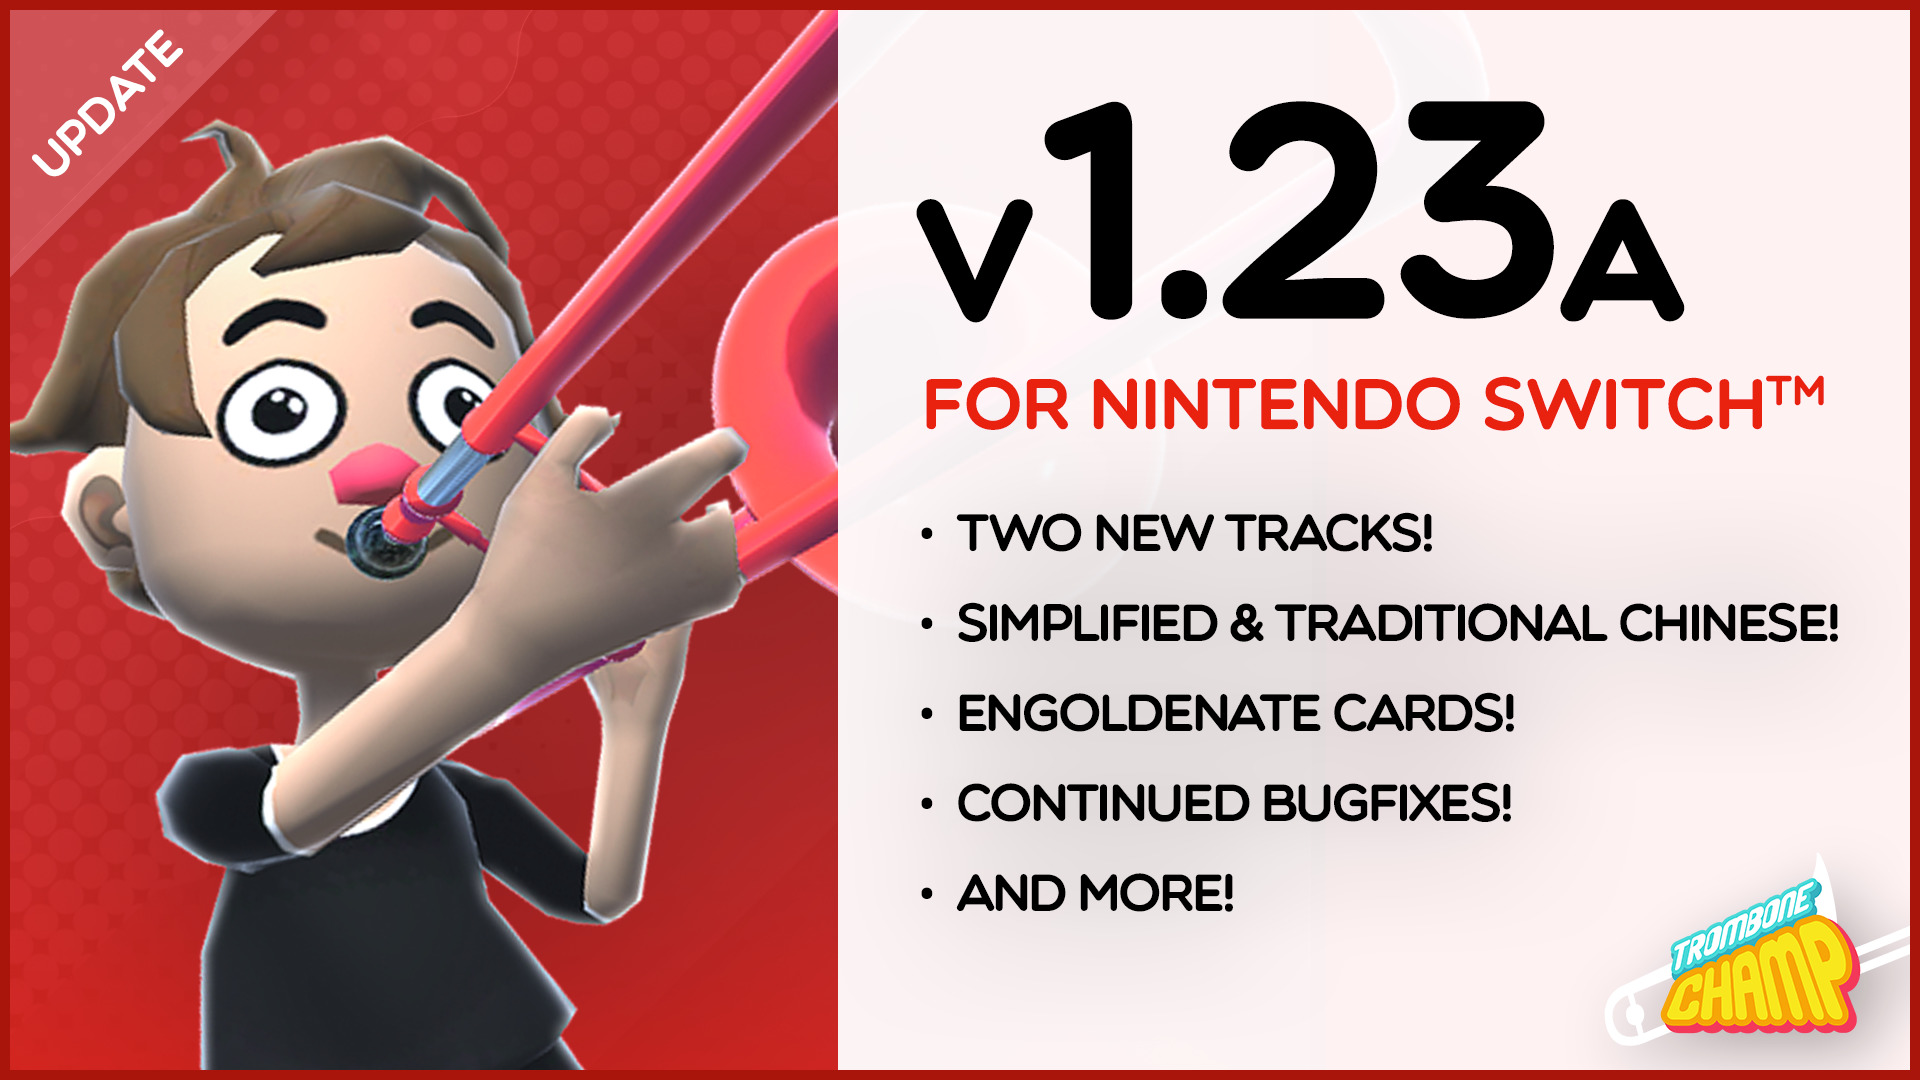 Trombone Champ Version 1.23A comes to the Nintendo Switch™!!!